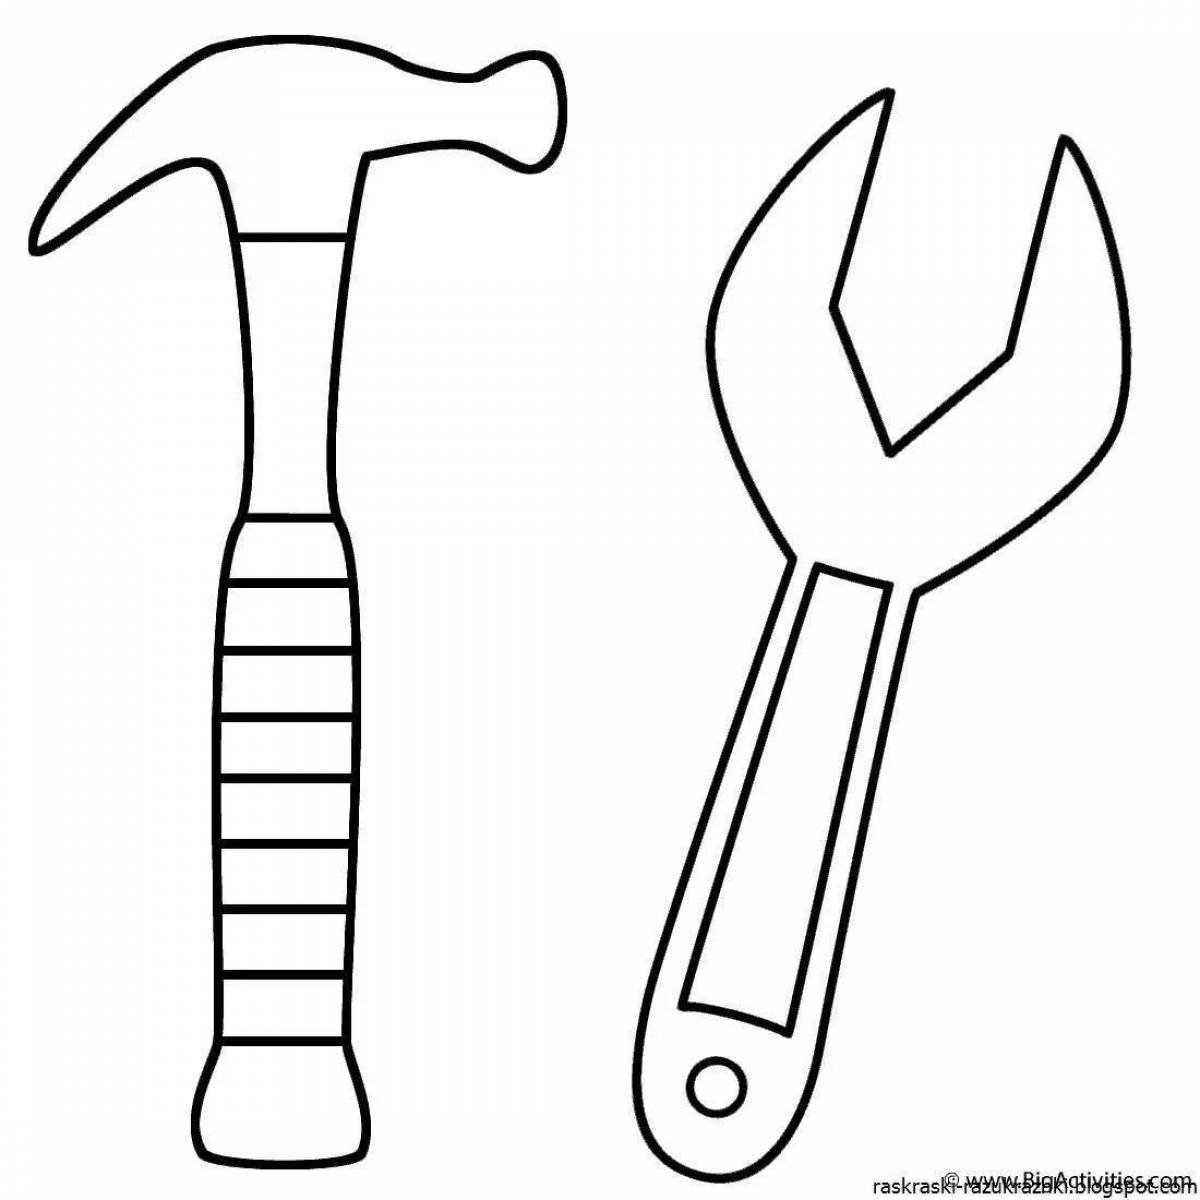 Playful building tools coloring page